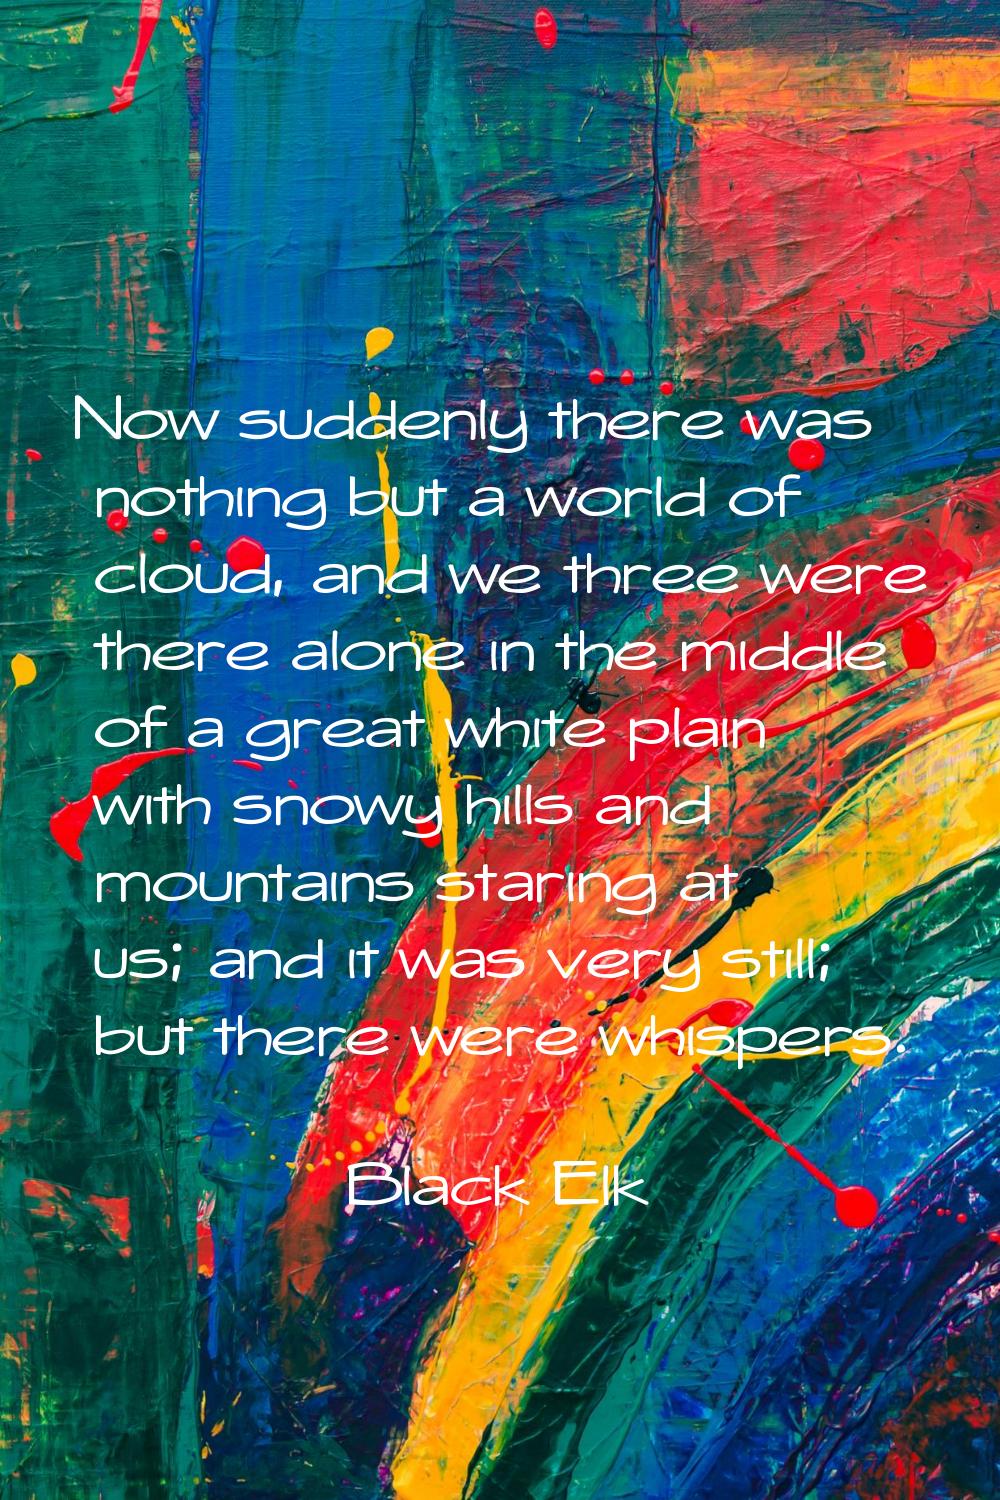 Now suddenly there was nothing but a world of cloud, and we three were there alone in the middle of